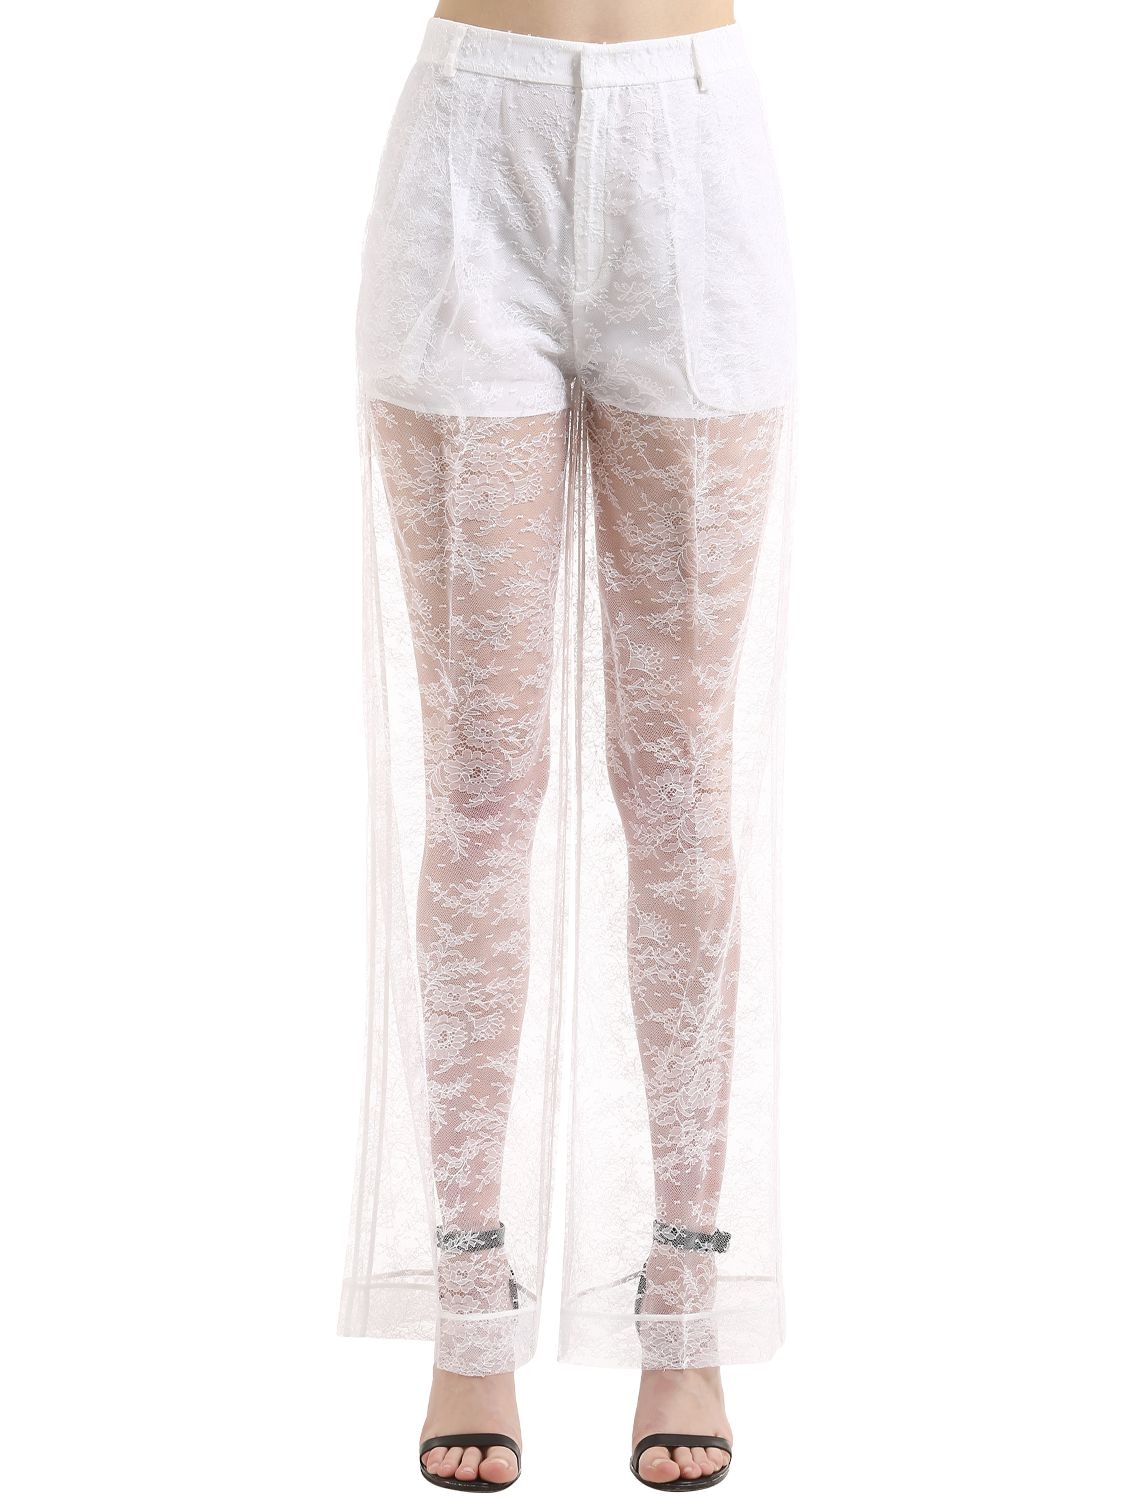 GIVENCHY SHEER LACE WIDE LEG PANTS,67IA7M039-MTAW0